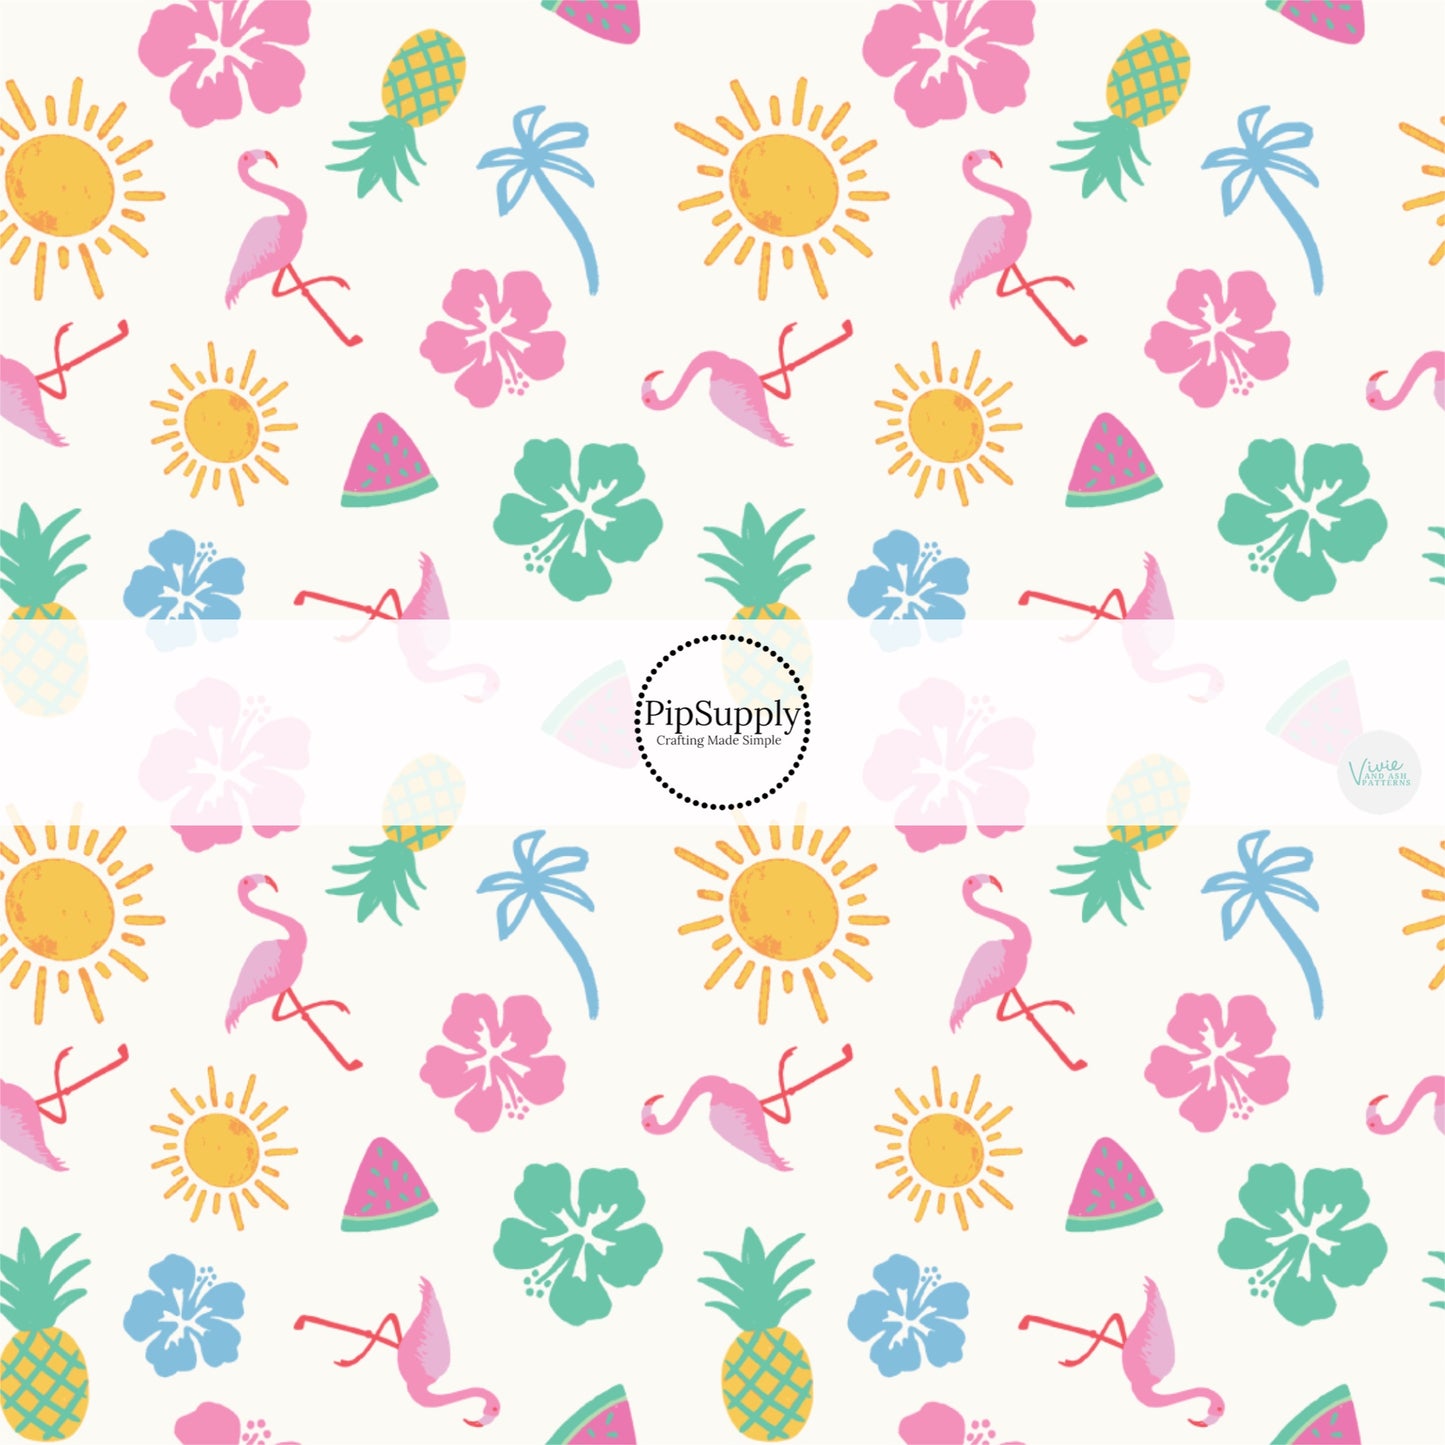 This beach fabric by the yard features tropical flowers, suns, flamingos, and palm trees. This fun themed fabric can be used for all your sewing and crafting needs!